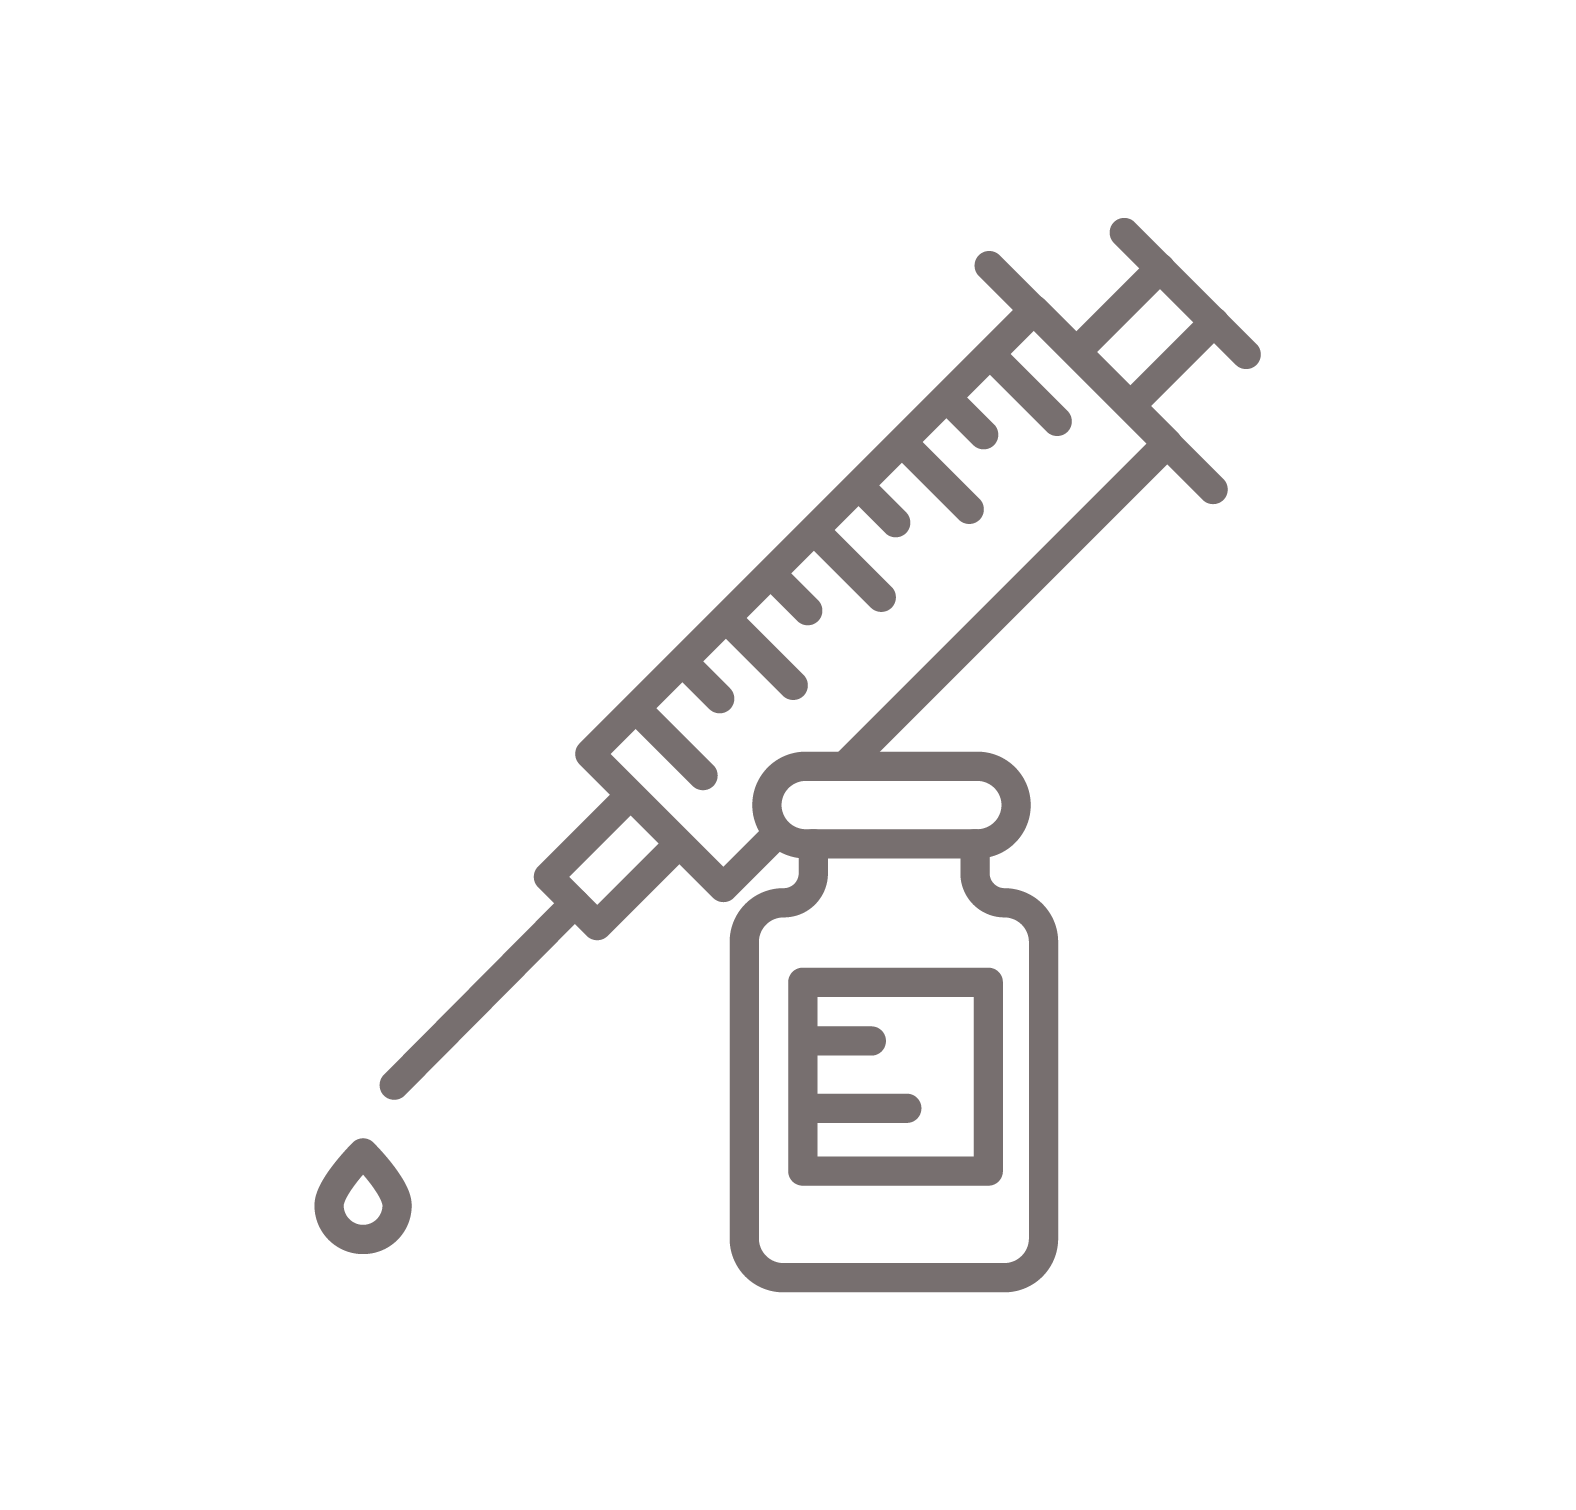 icon showing medicine and a needle